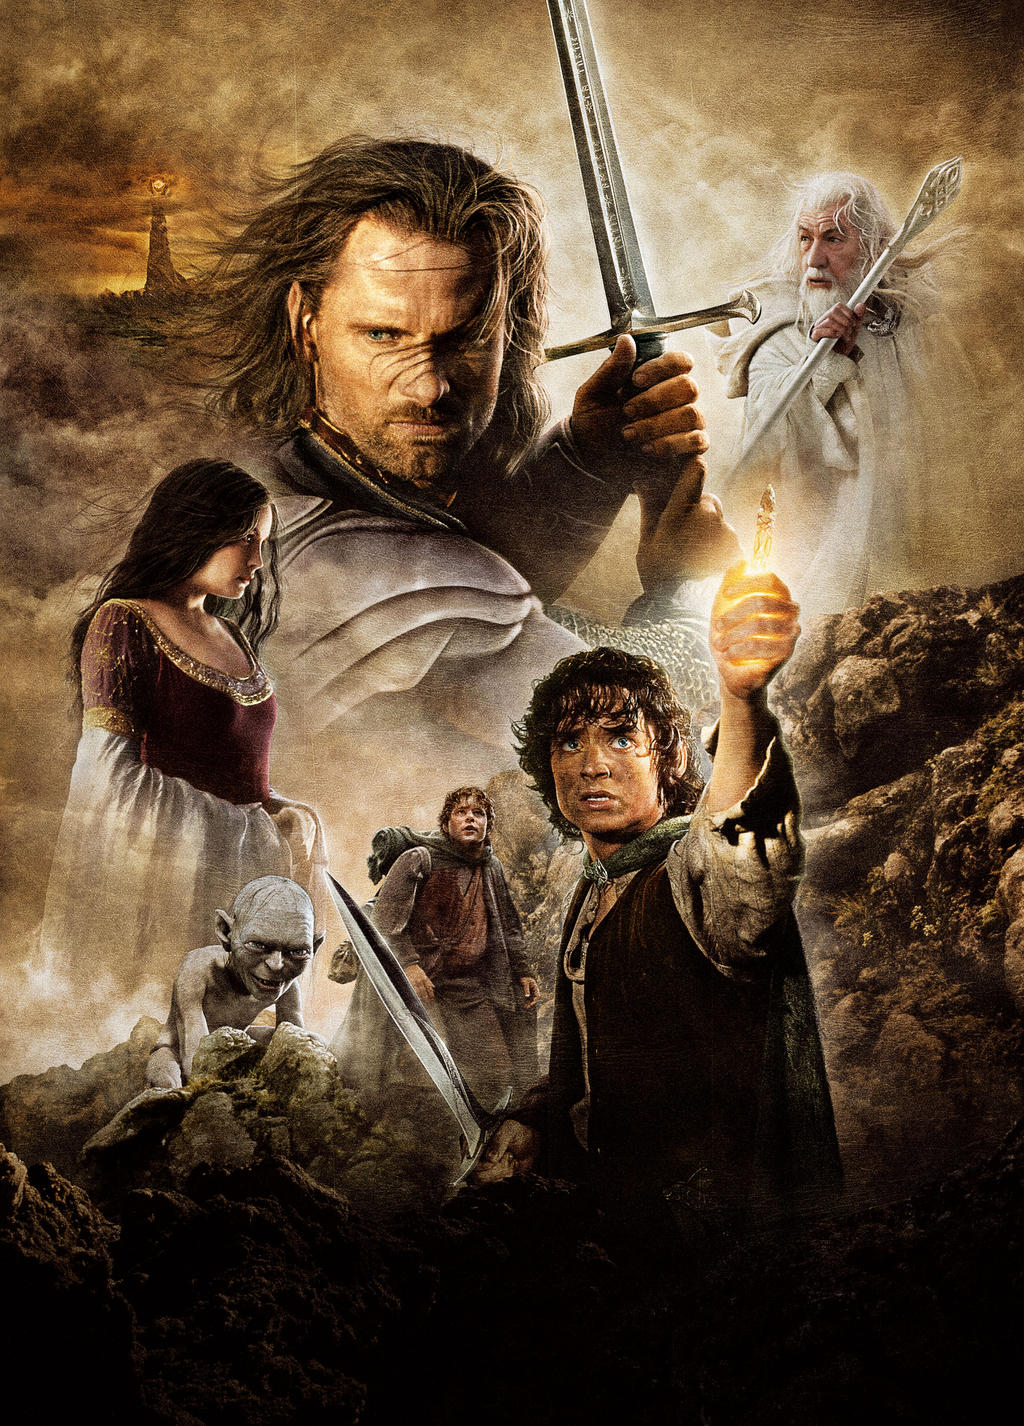 The lord of the rings: return of the king by agustin09 on DeviantArt